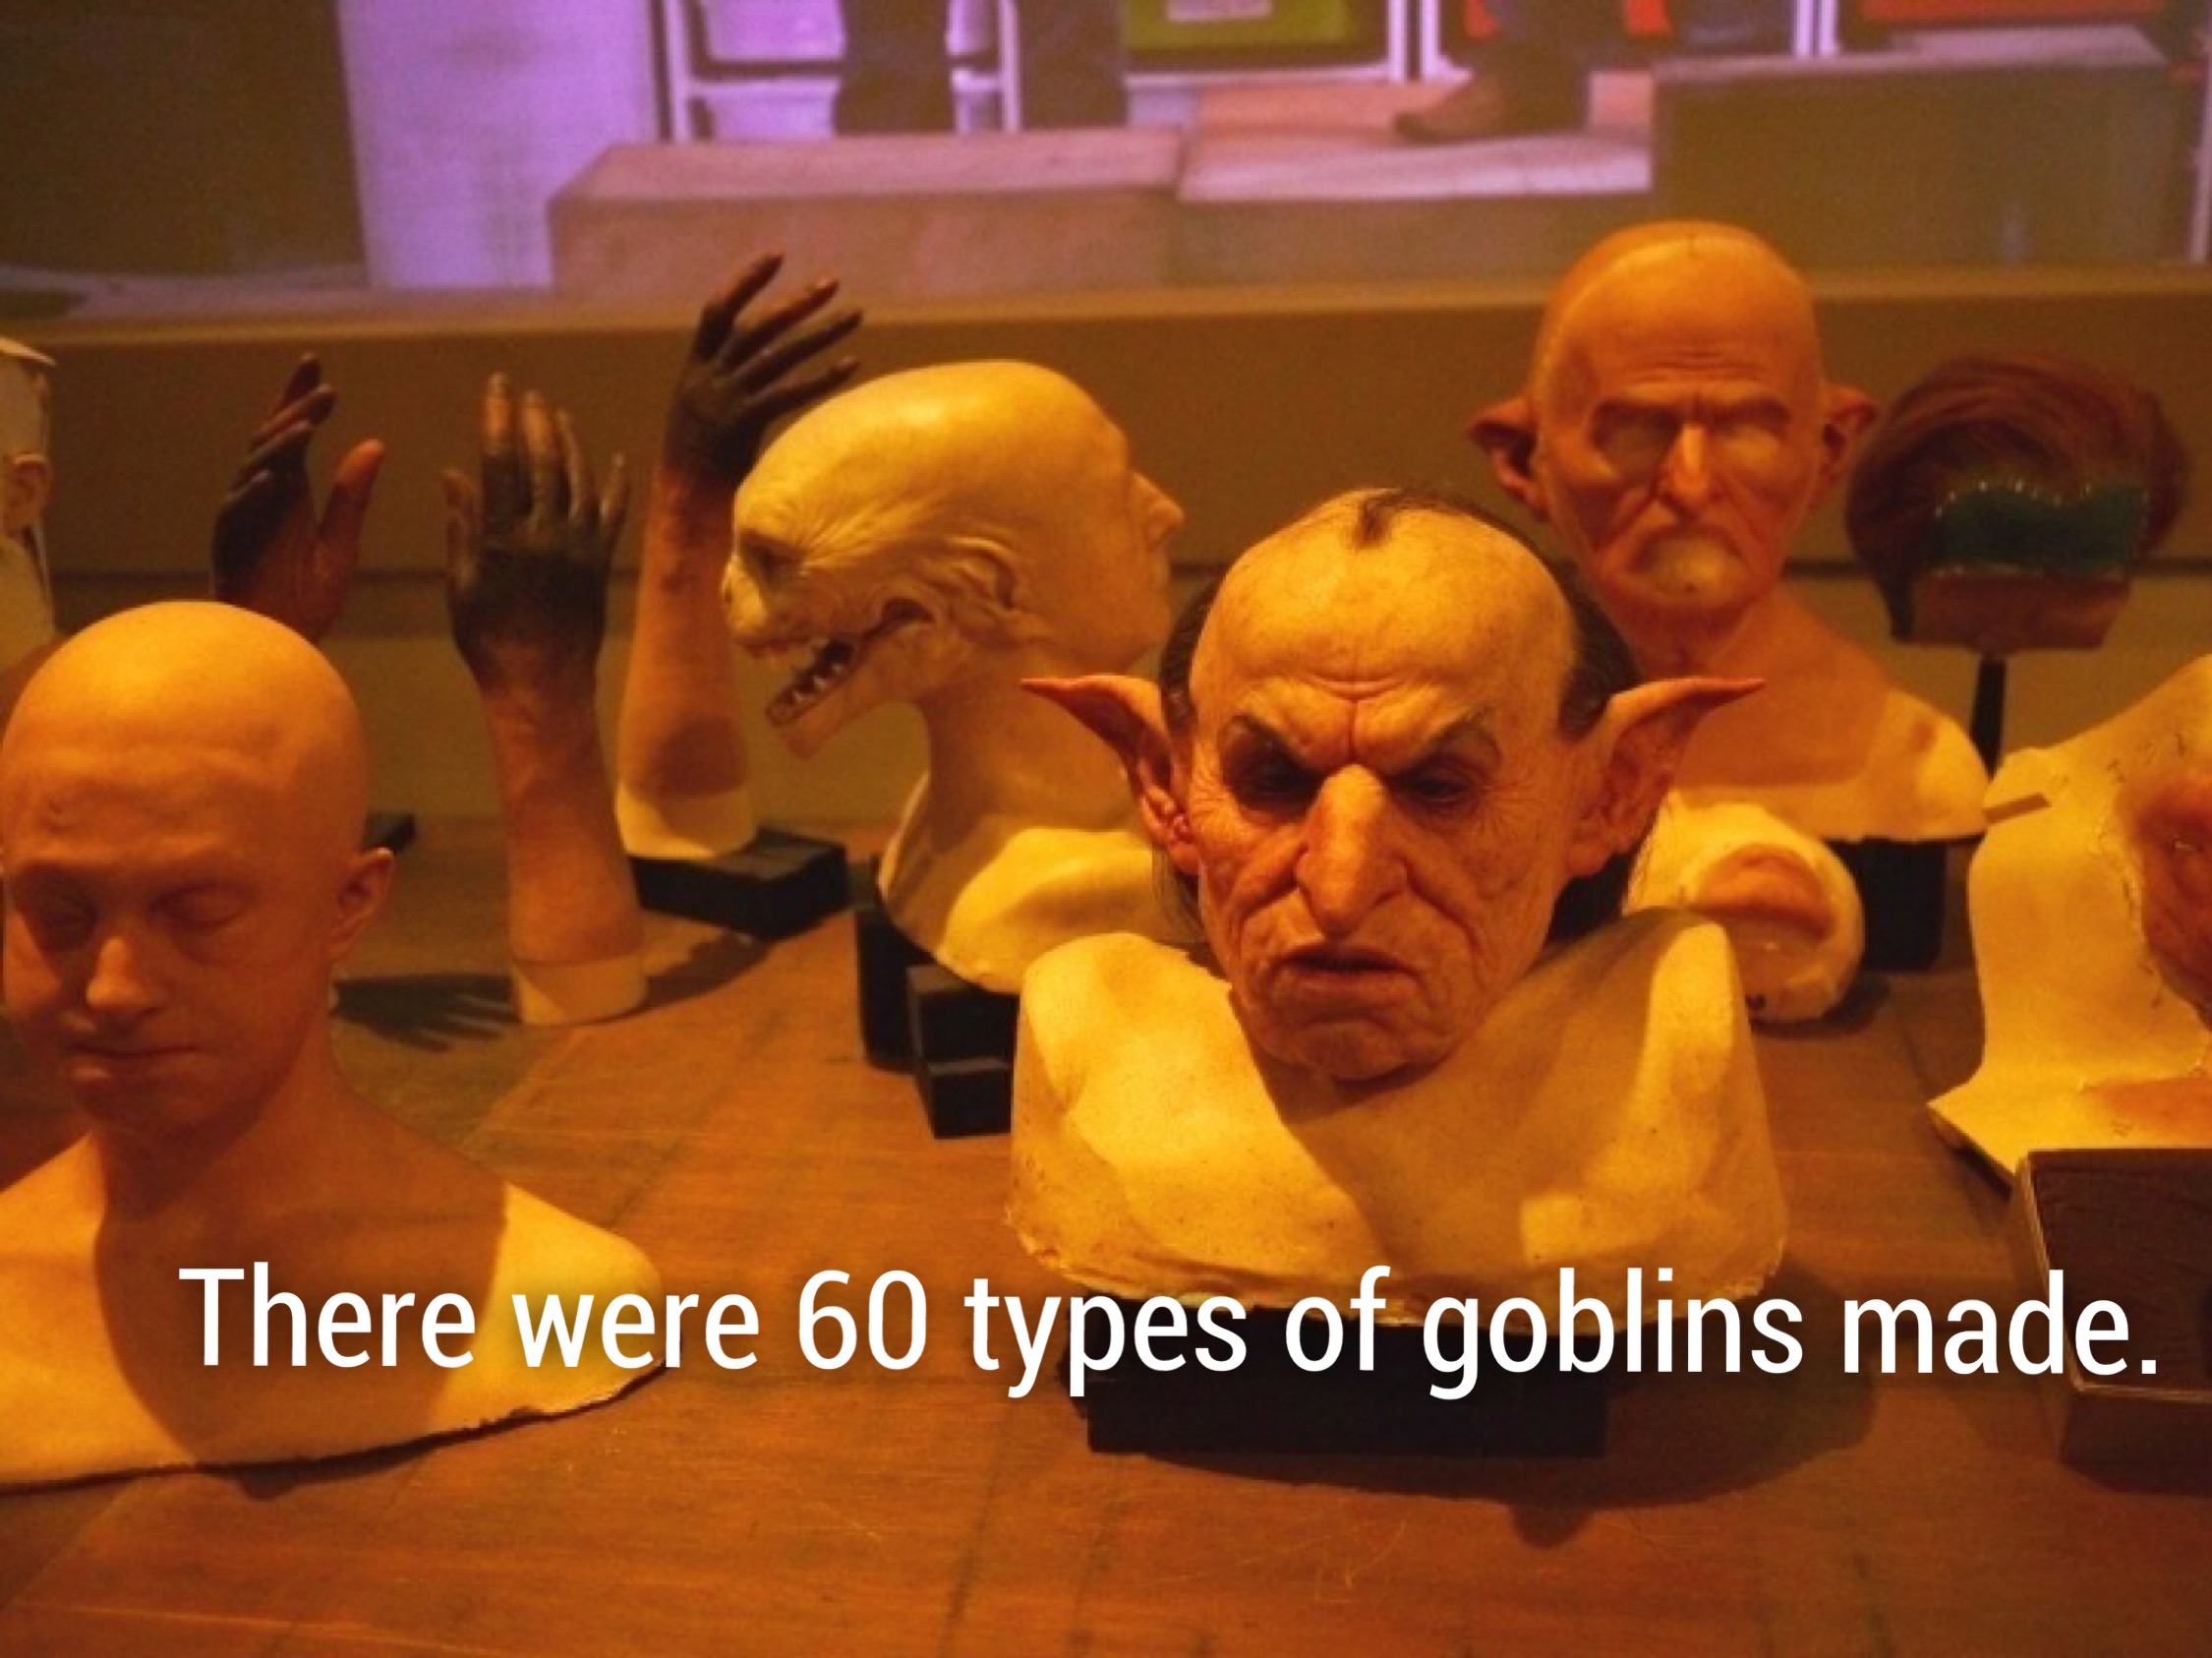 photo caption - There were 60 types of goblins made.